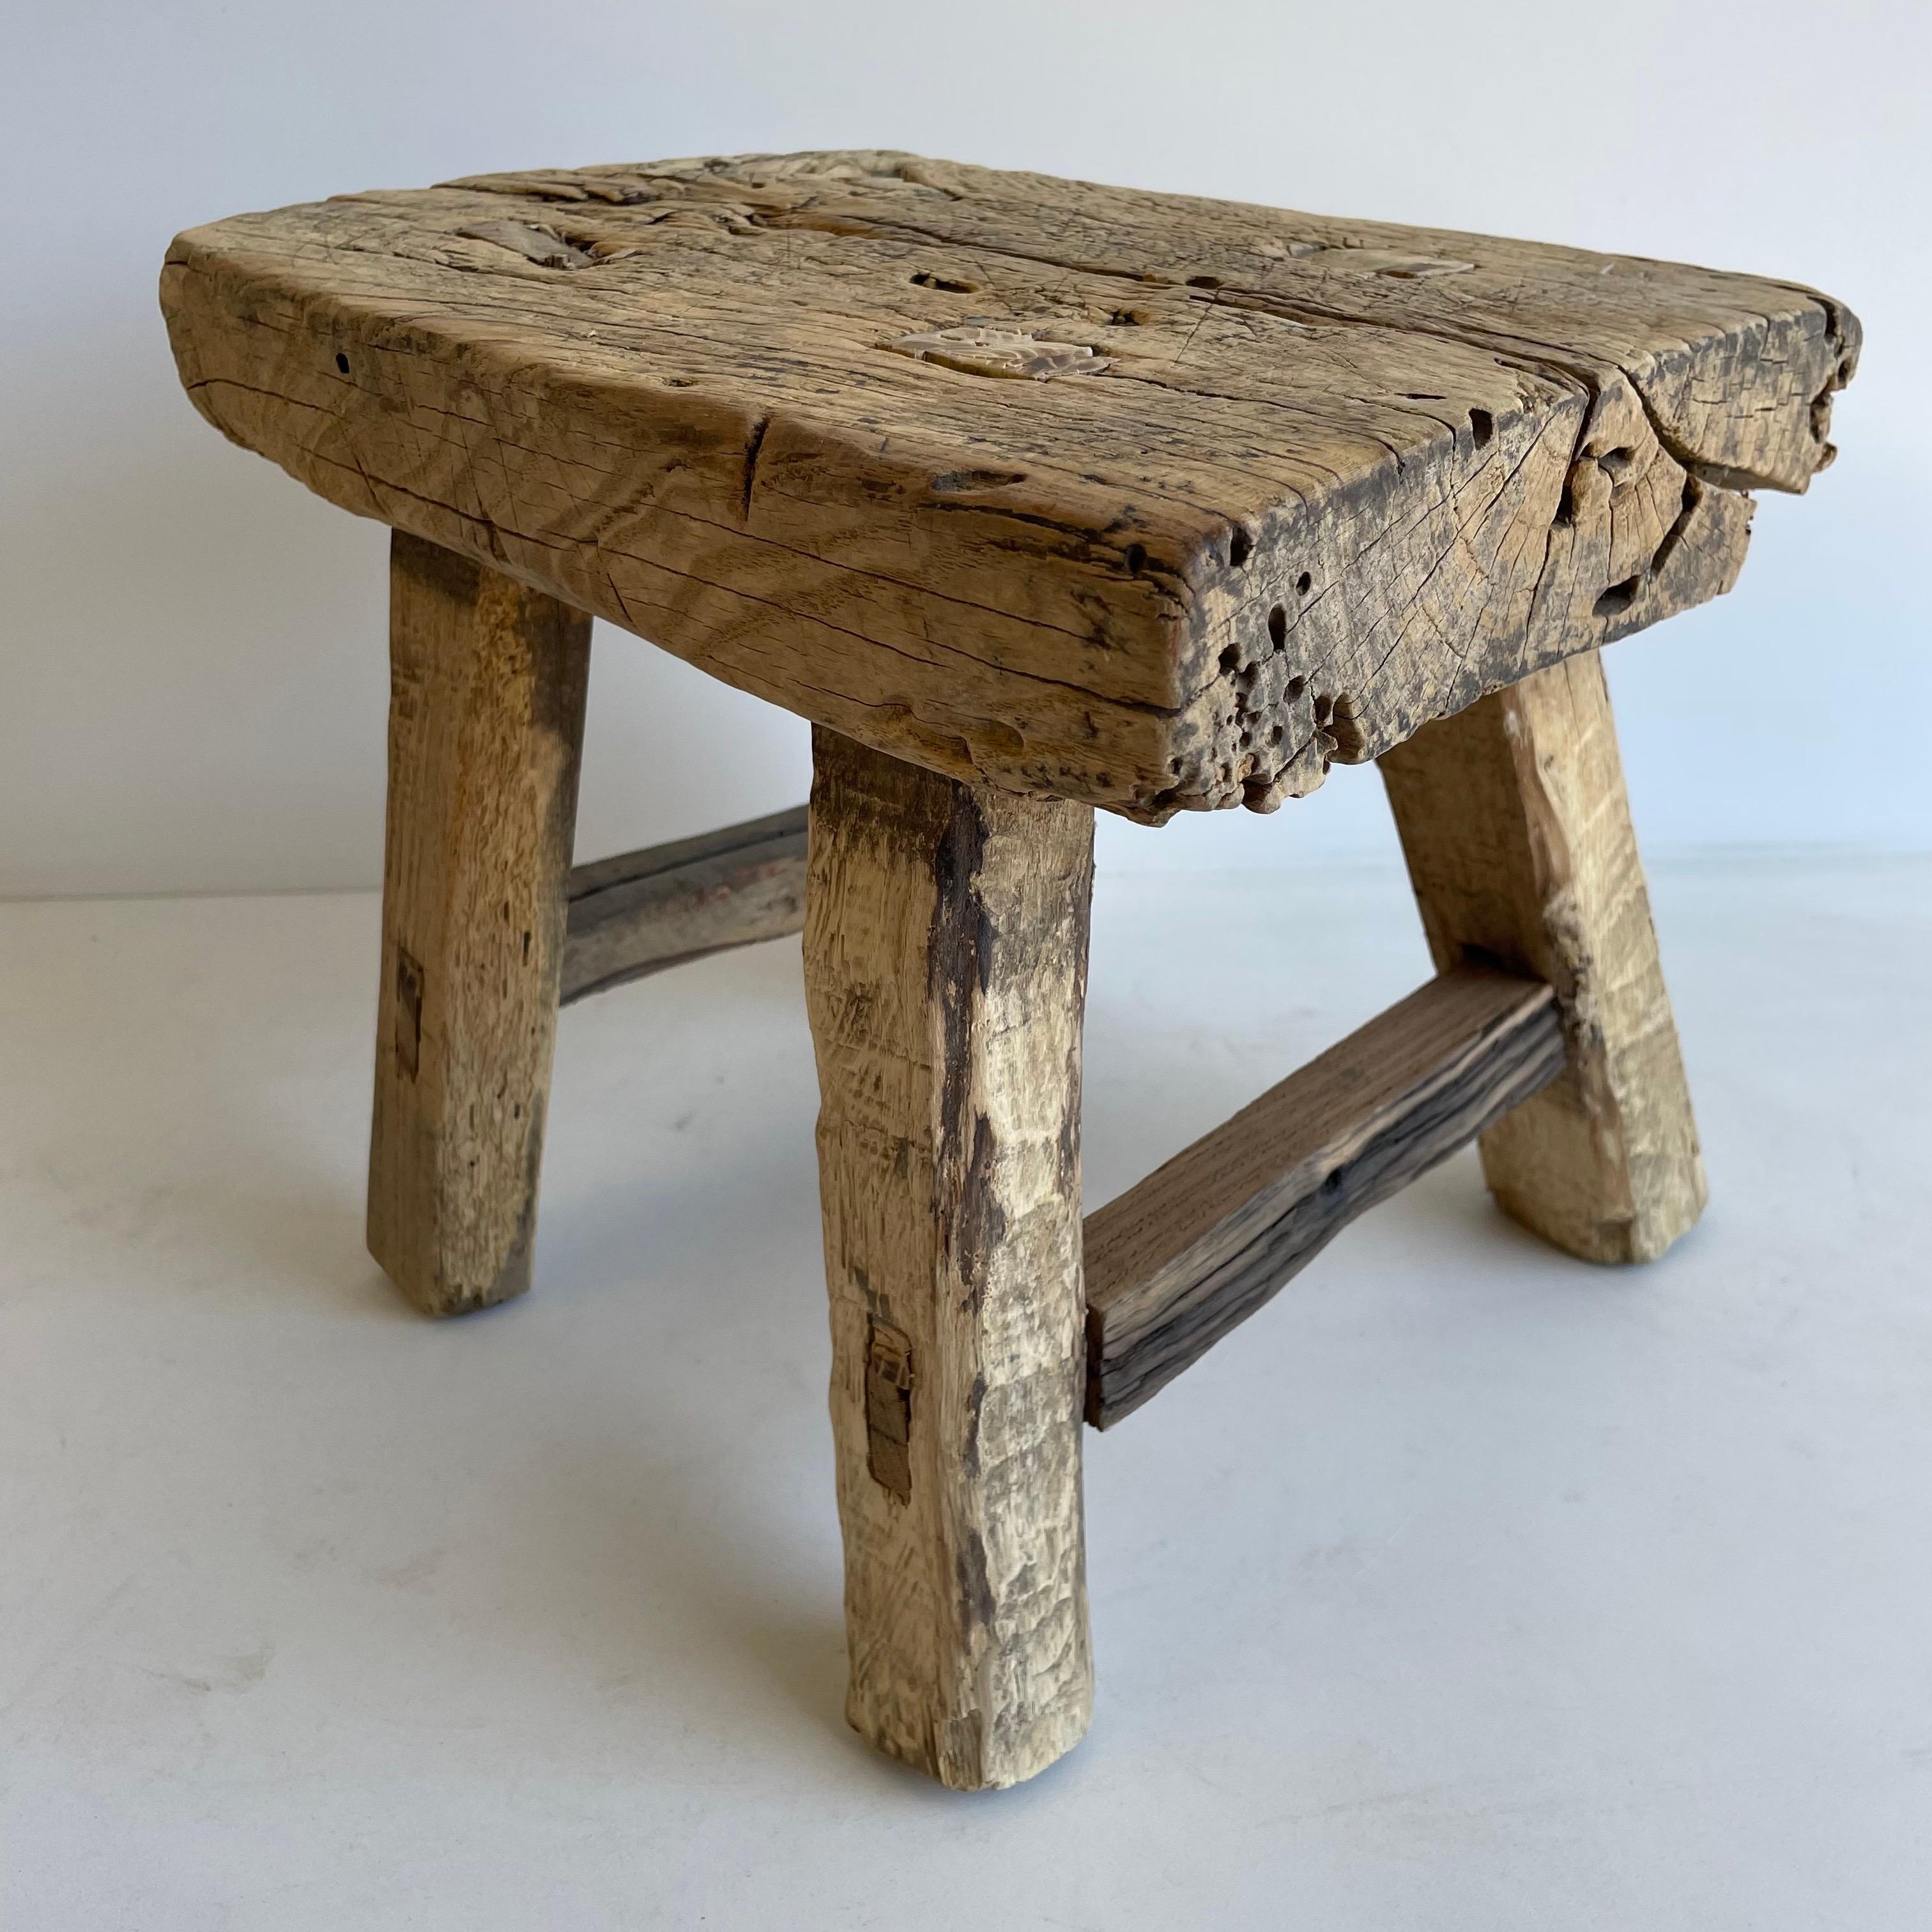 Vintage antique elm wood mini stool
These are the real vintage antique elm wood mini stools! Beautiful antique patina, with weathering and age, these are solid and sturdy ready for daily use, use as a table, stool, drink table, they are great for